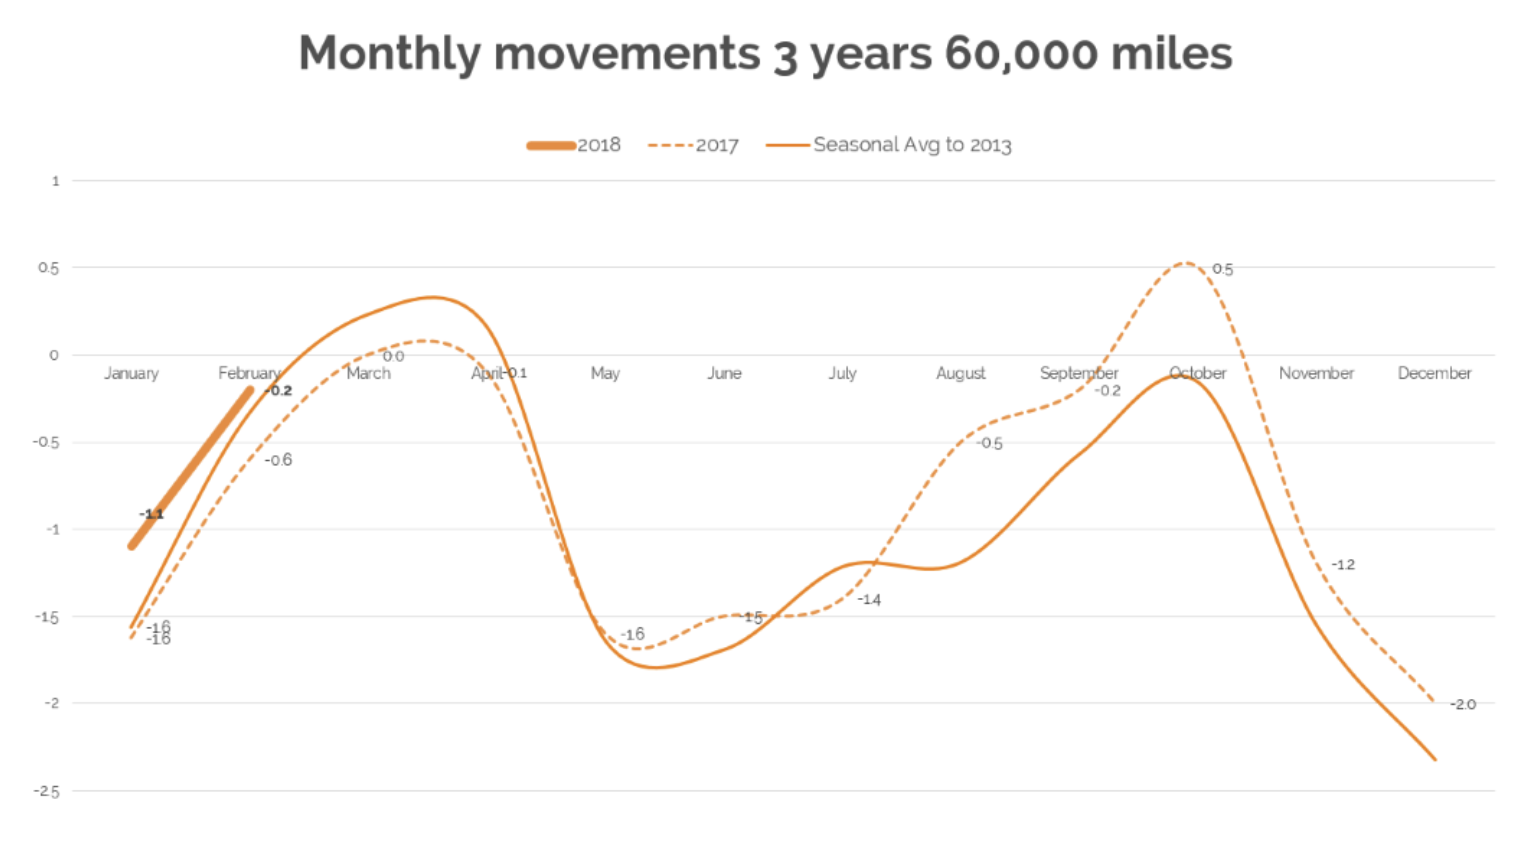 Monthly movements 3 years 60,000 miles